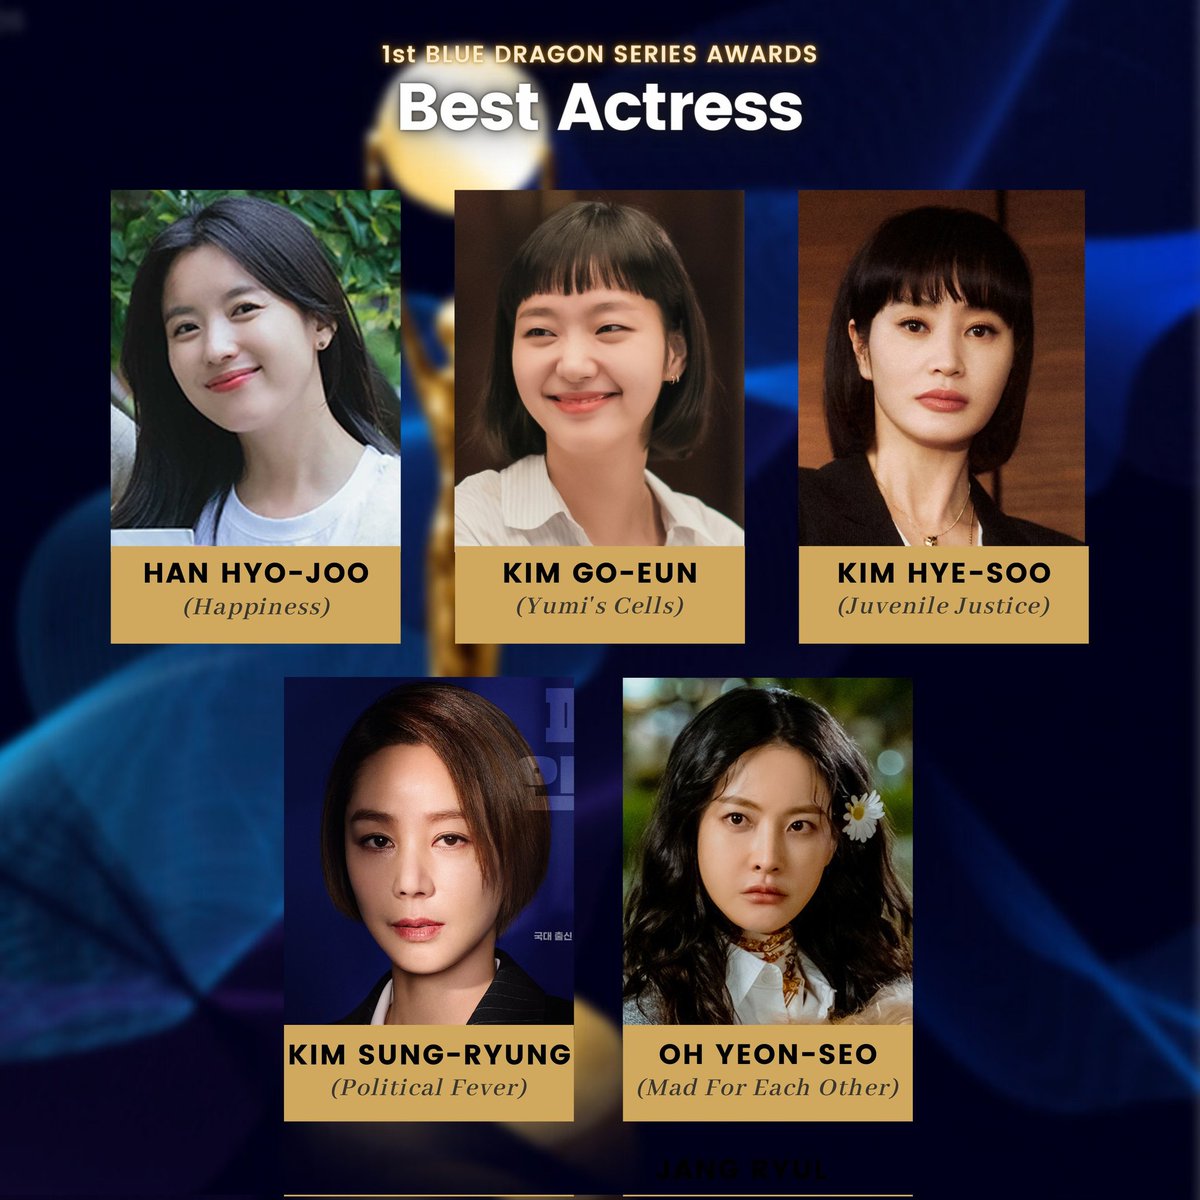 Blue Dragon Series Awards Best Actress Nominees
#HanHyoJoo for #Happiness 
#KimGoEun for #YumisCells 
#KimHyeSoo for #JuvenileJustice
#KimSungRyung for #PoliticalFever
#OhYeonSeo for #MadForEachOther